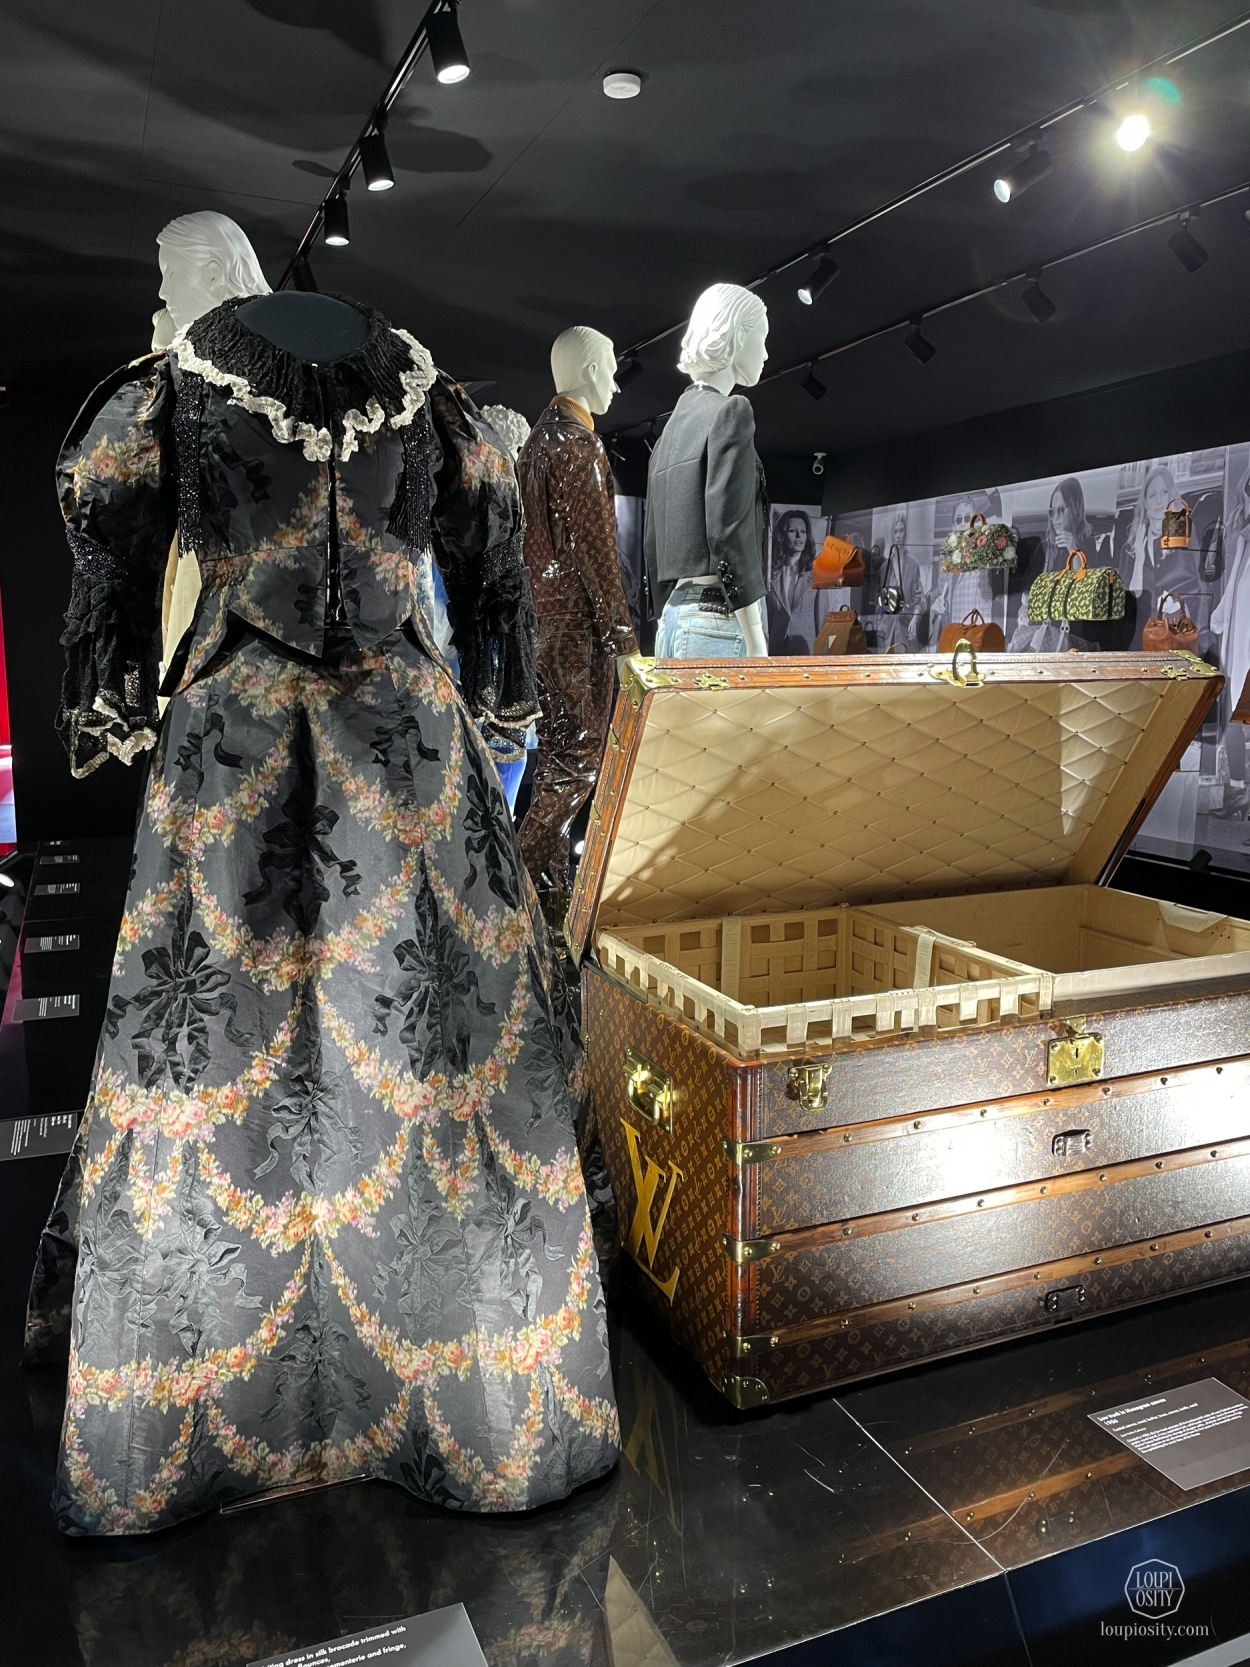 Louis Vuitton's Travelling Exhibition SEE LV Arrives in Dubai - GQ